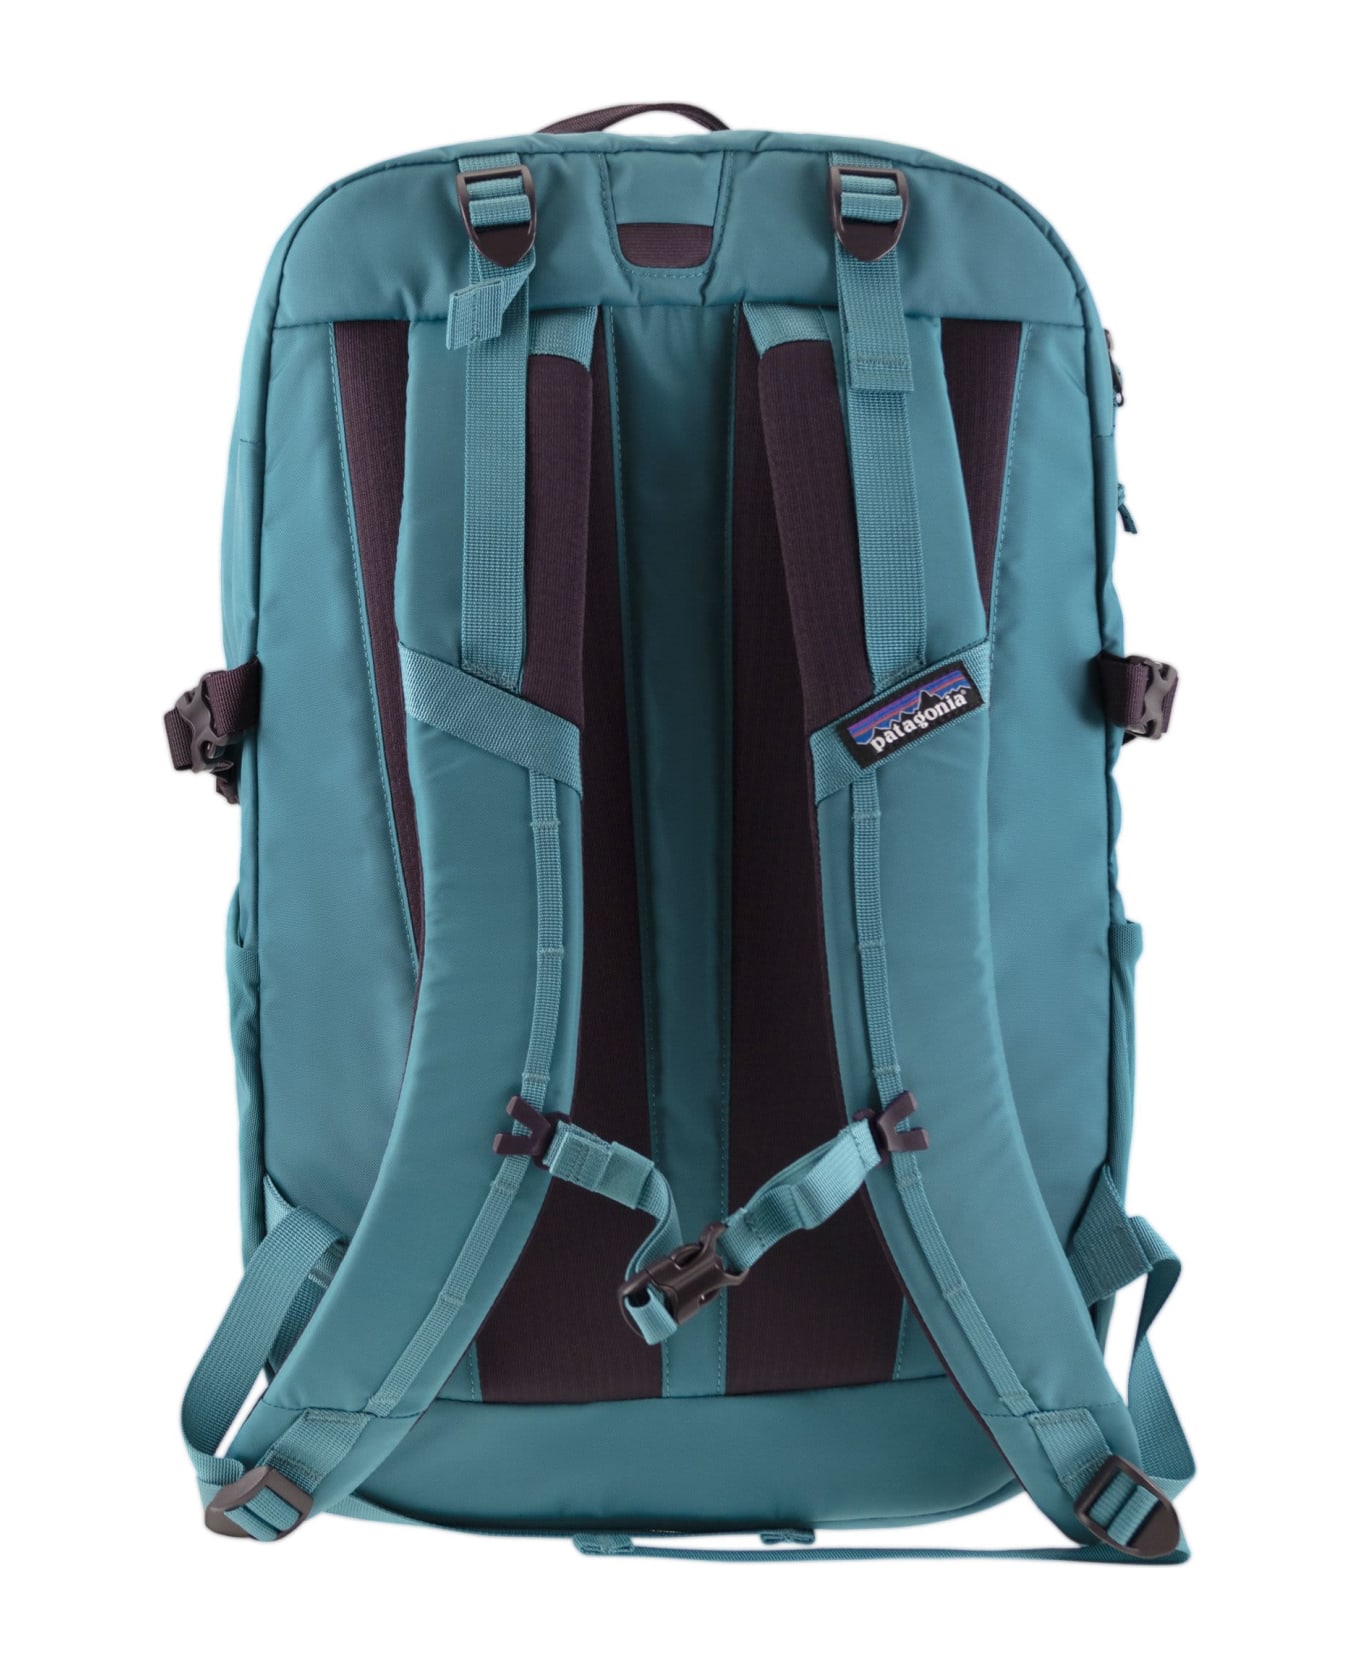 Patagonia Refugio Day Pack - Backpack - Light Blue バックパック